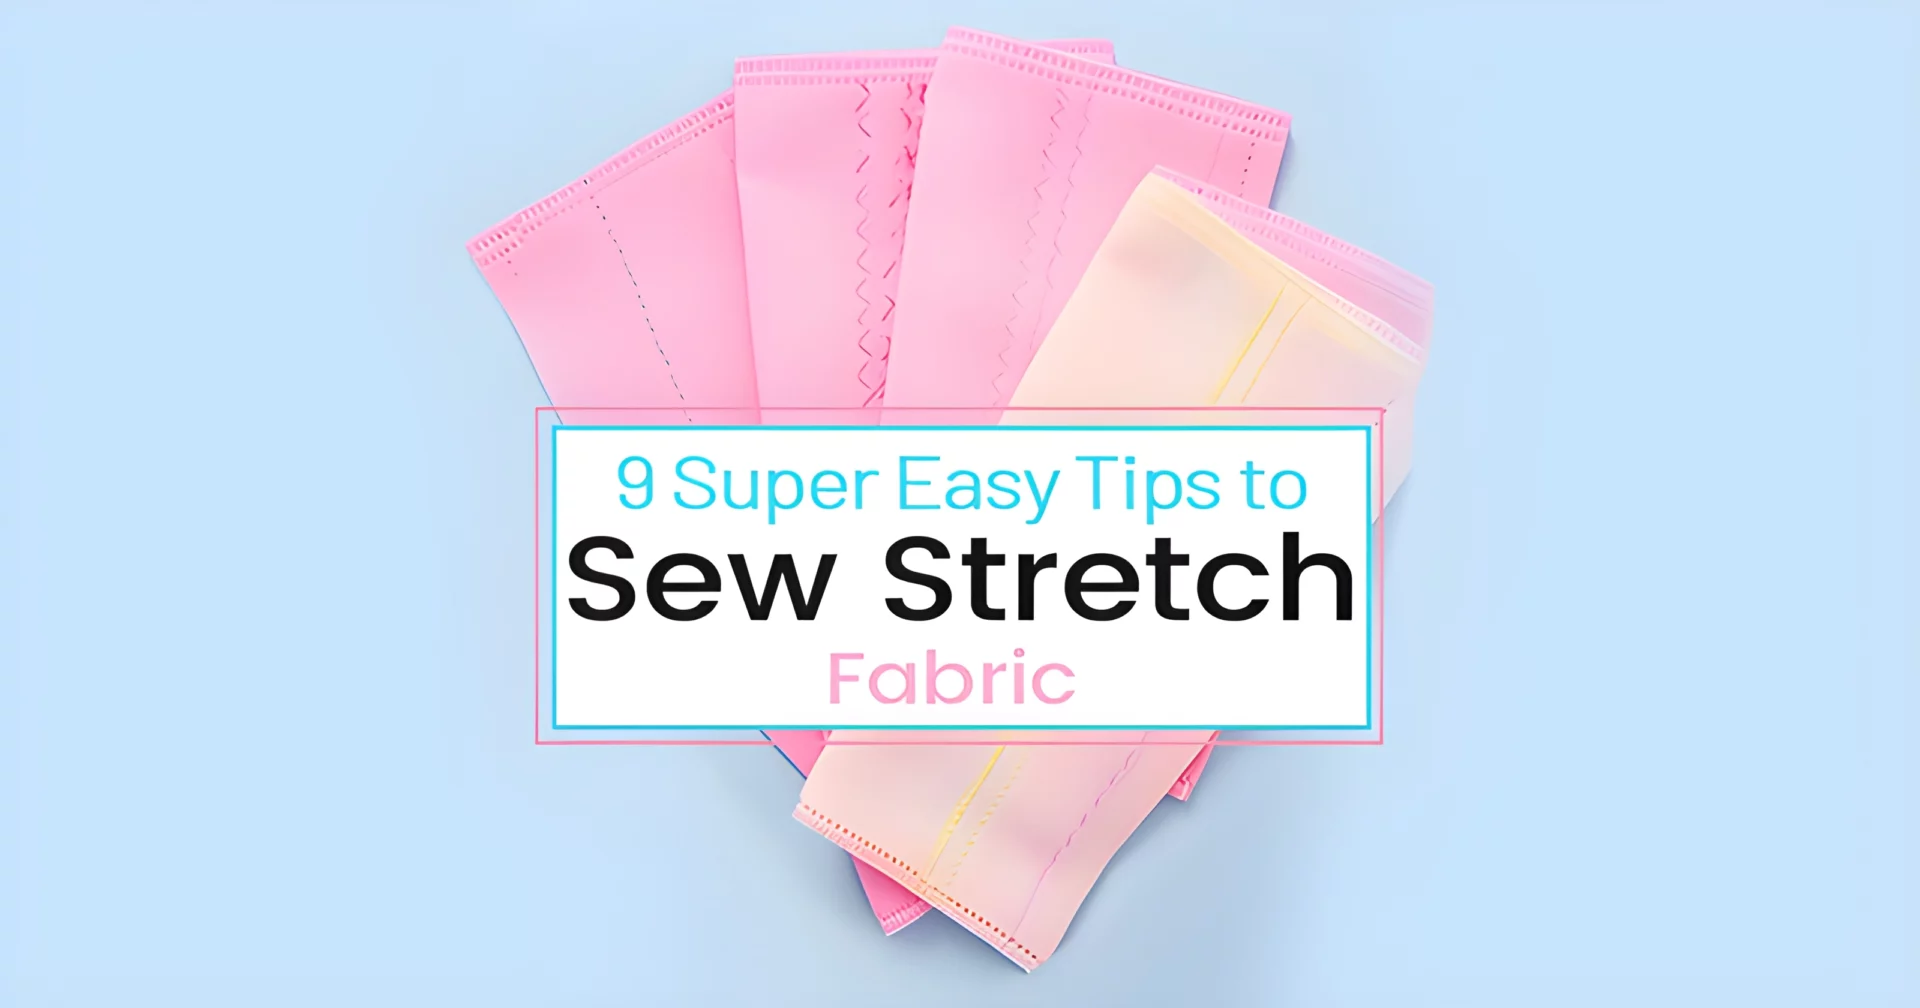 8 super easy tips to sew stretch fabric.